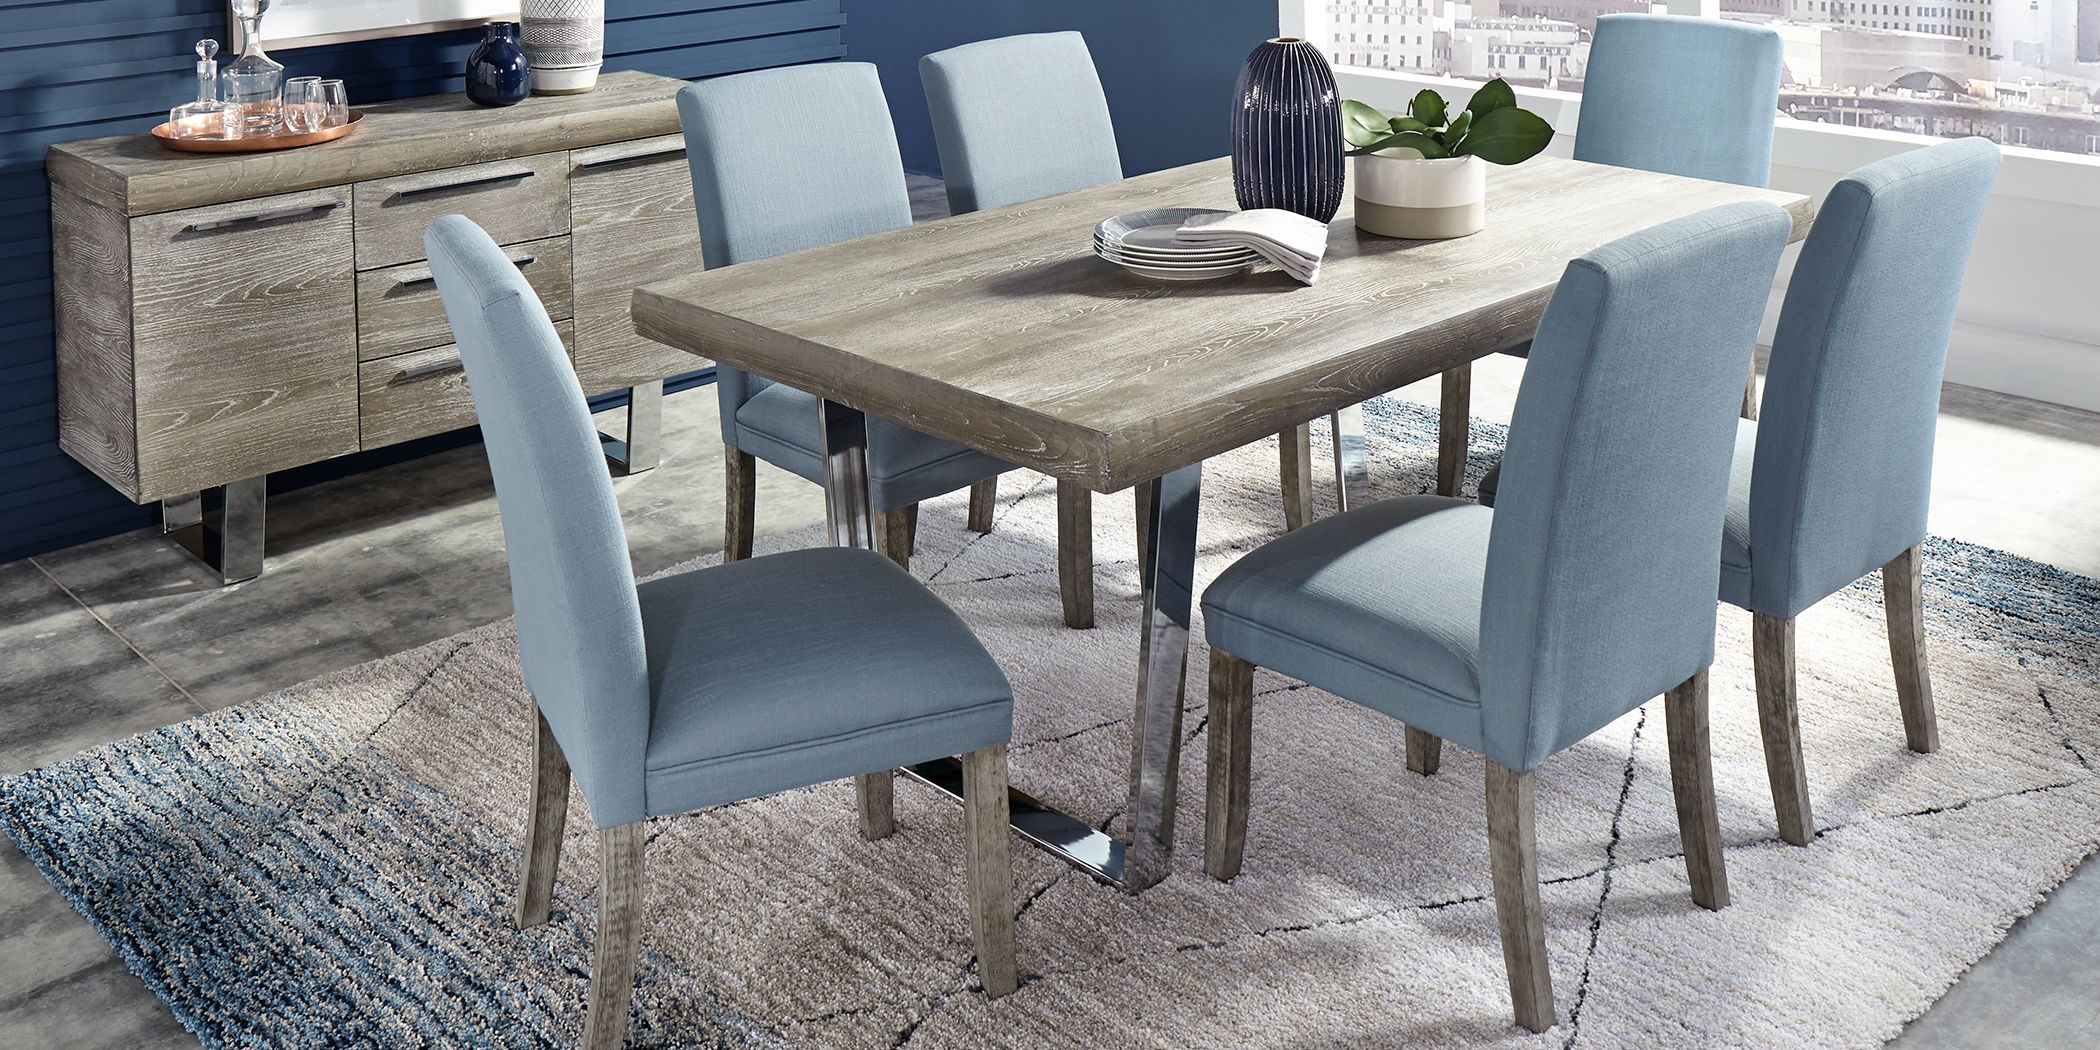 Blue Dining Room Table Sets, Blue Dining Room Table And Chairs